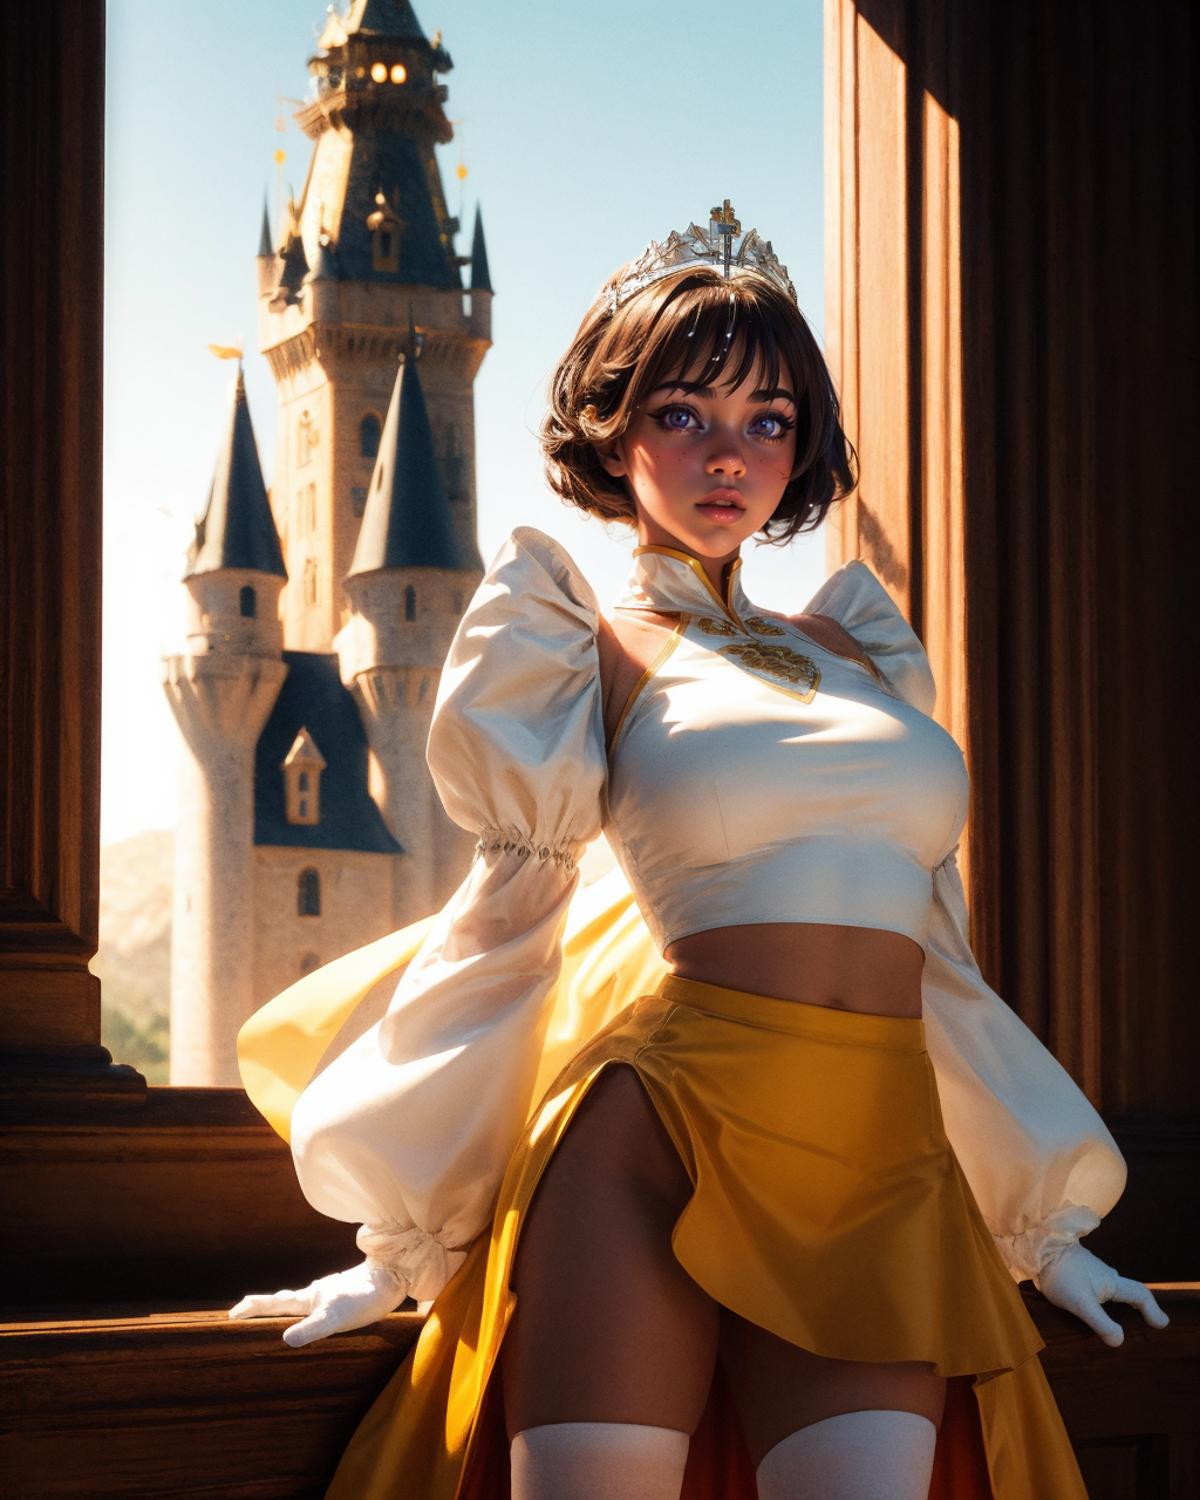 A woman wearing a white and yellow dress in front of a castle.